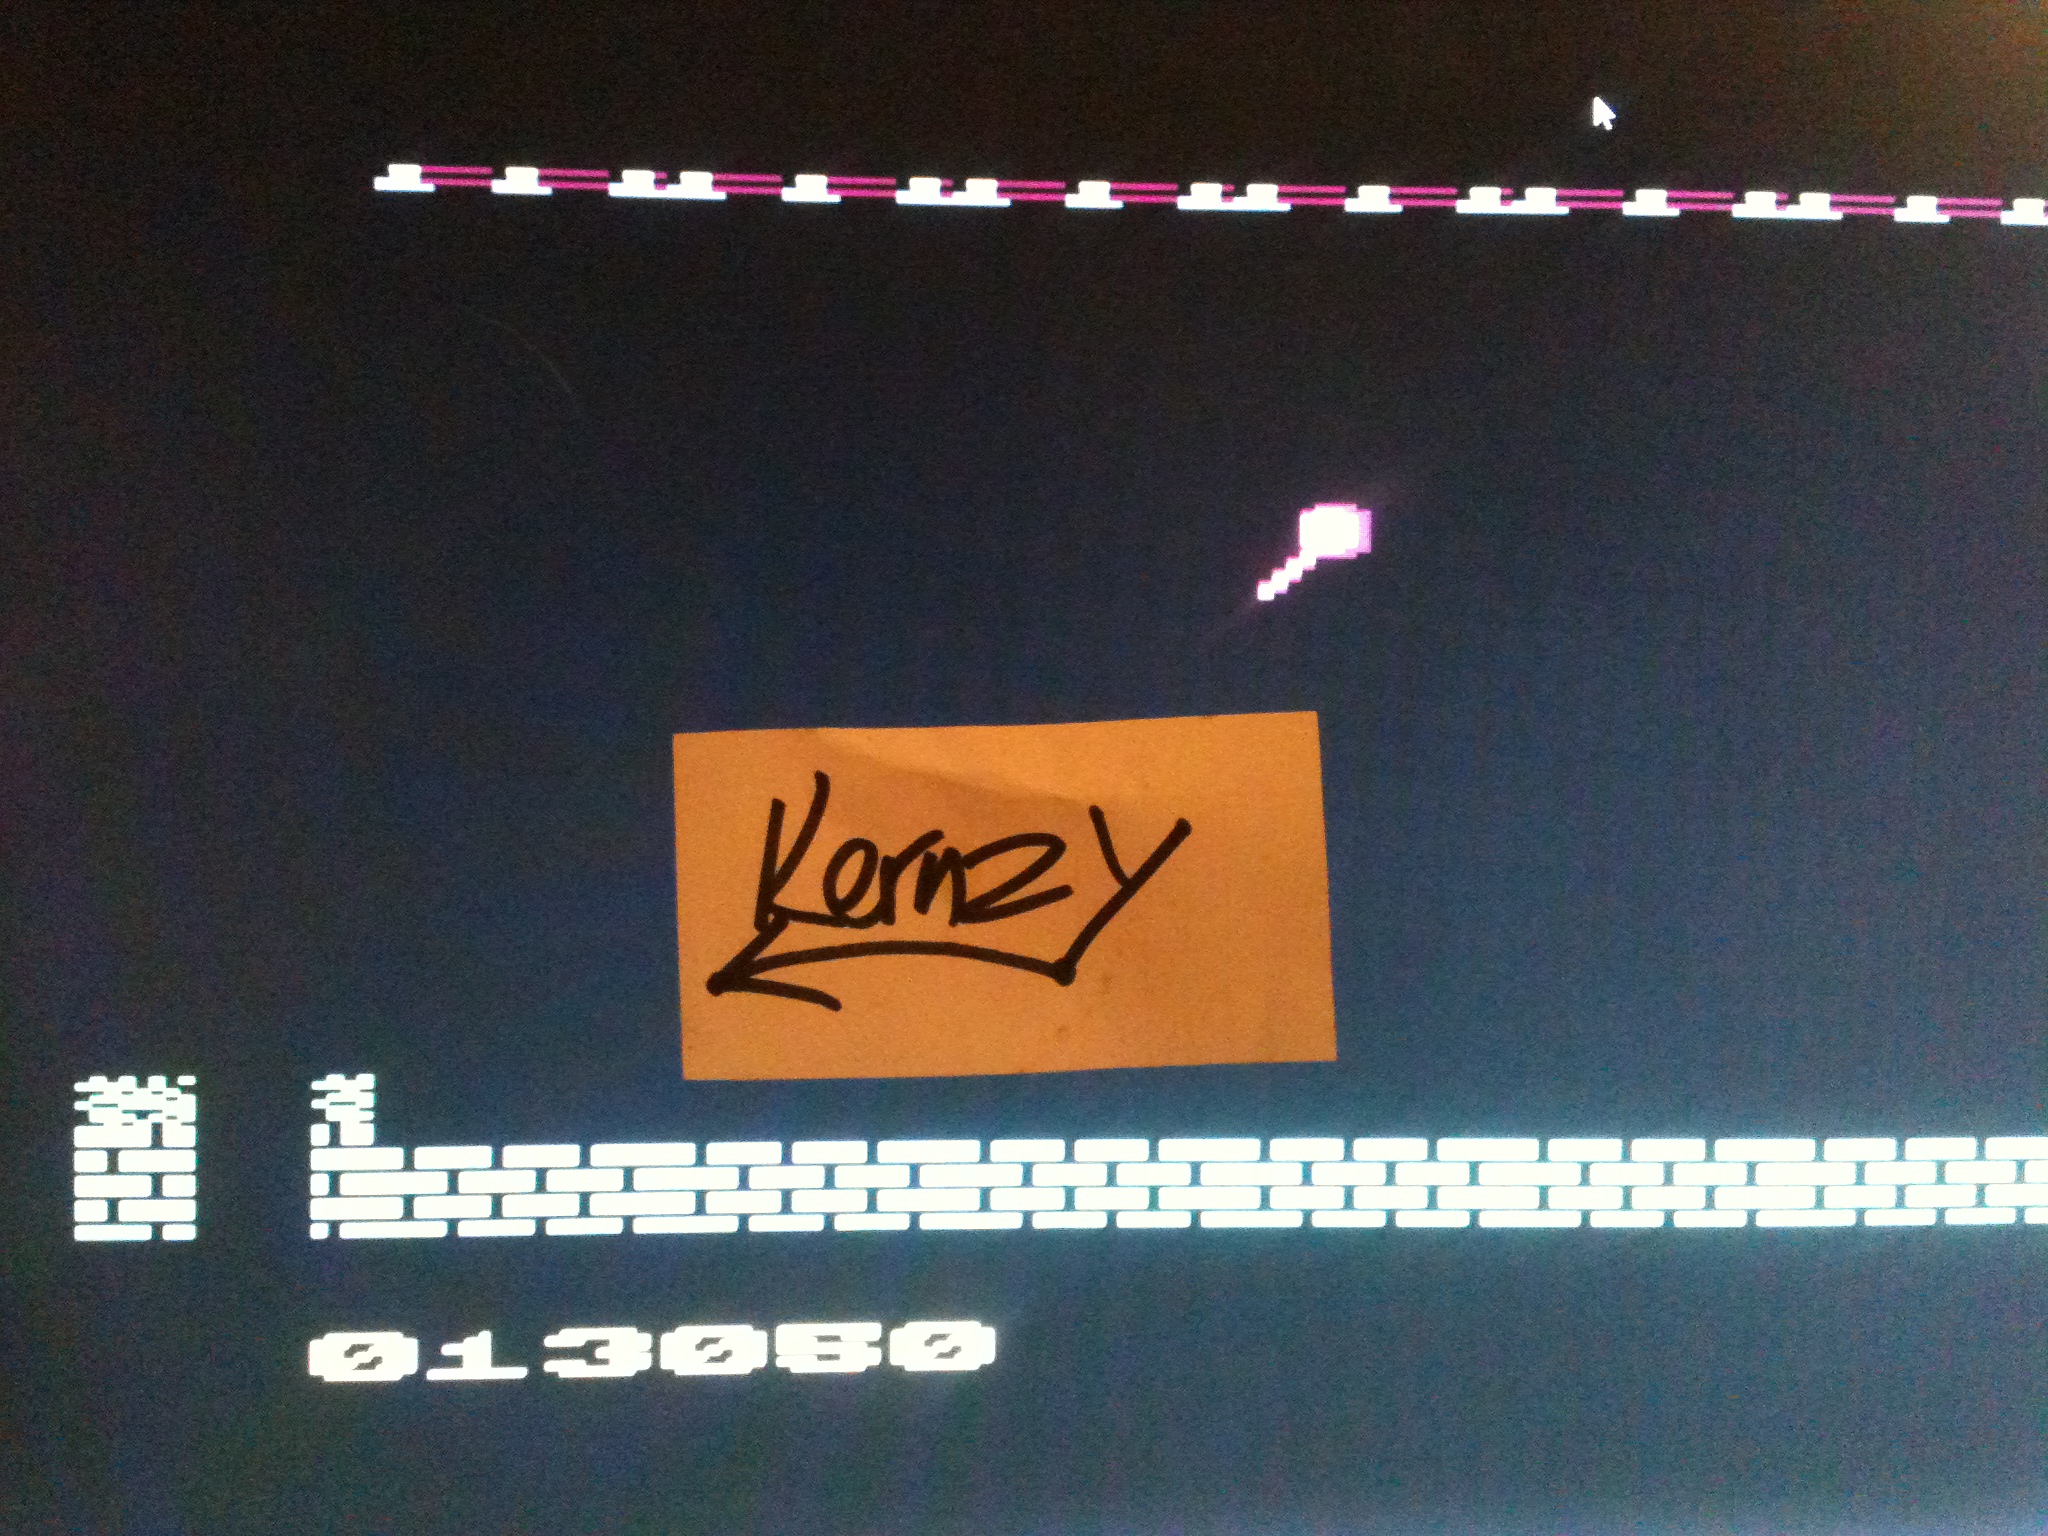 kernzy: Great Giana Sisters (Commodore 64 Emulated) 13,050 points on 2015-05-10 17:30:29